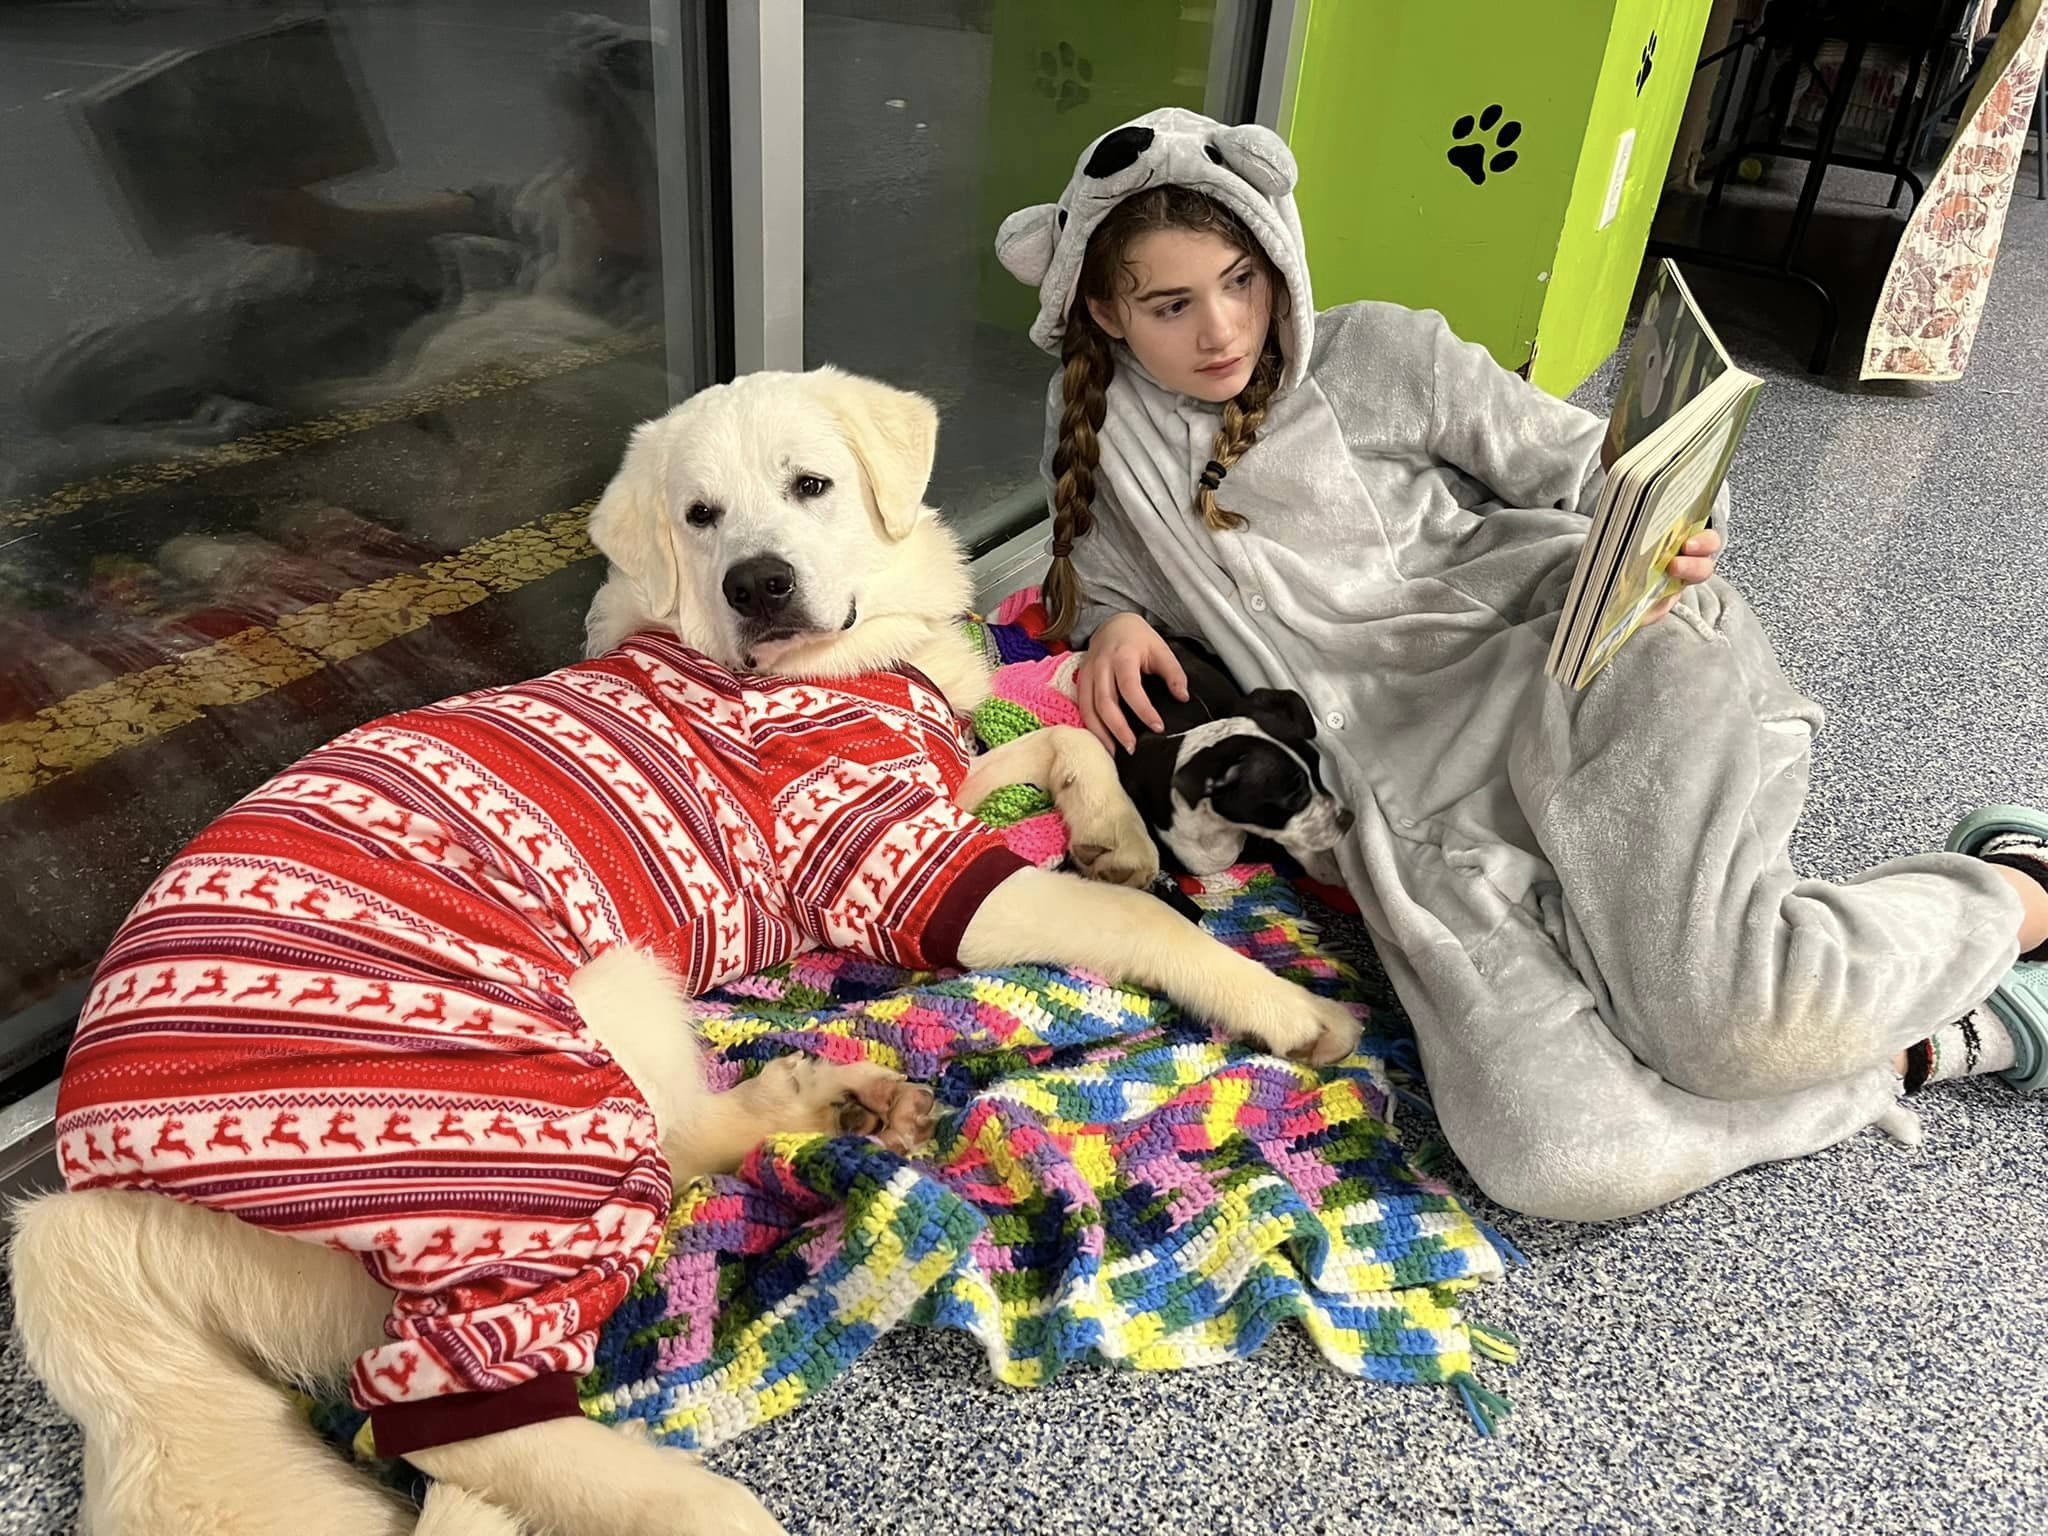 <h1 class="tribe-events-single-event-title">Puppies and Pajamas</h1>